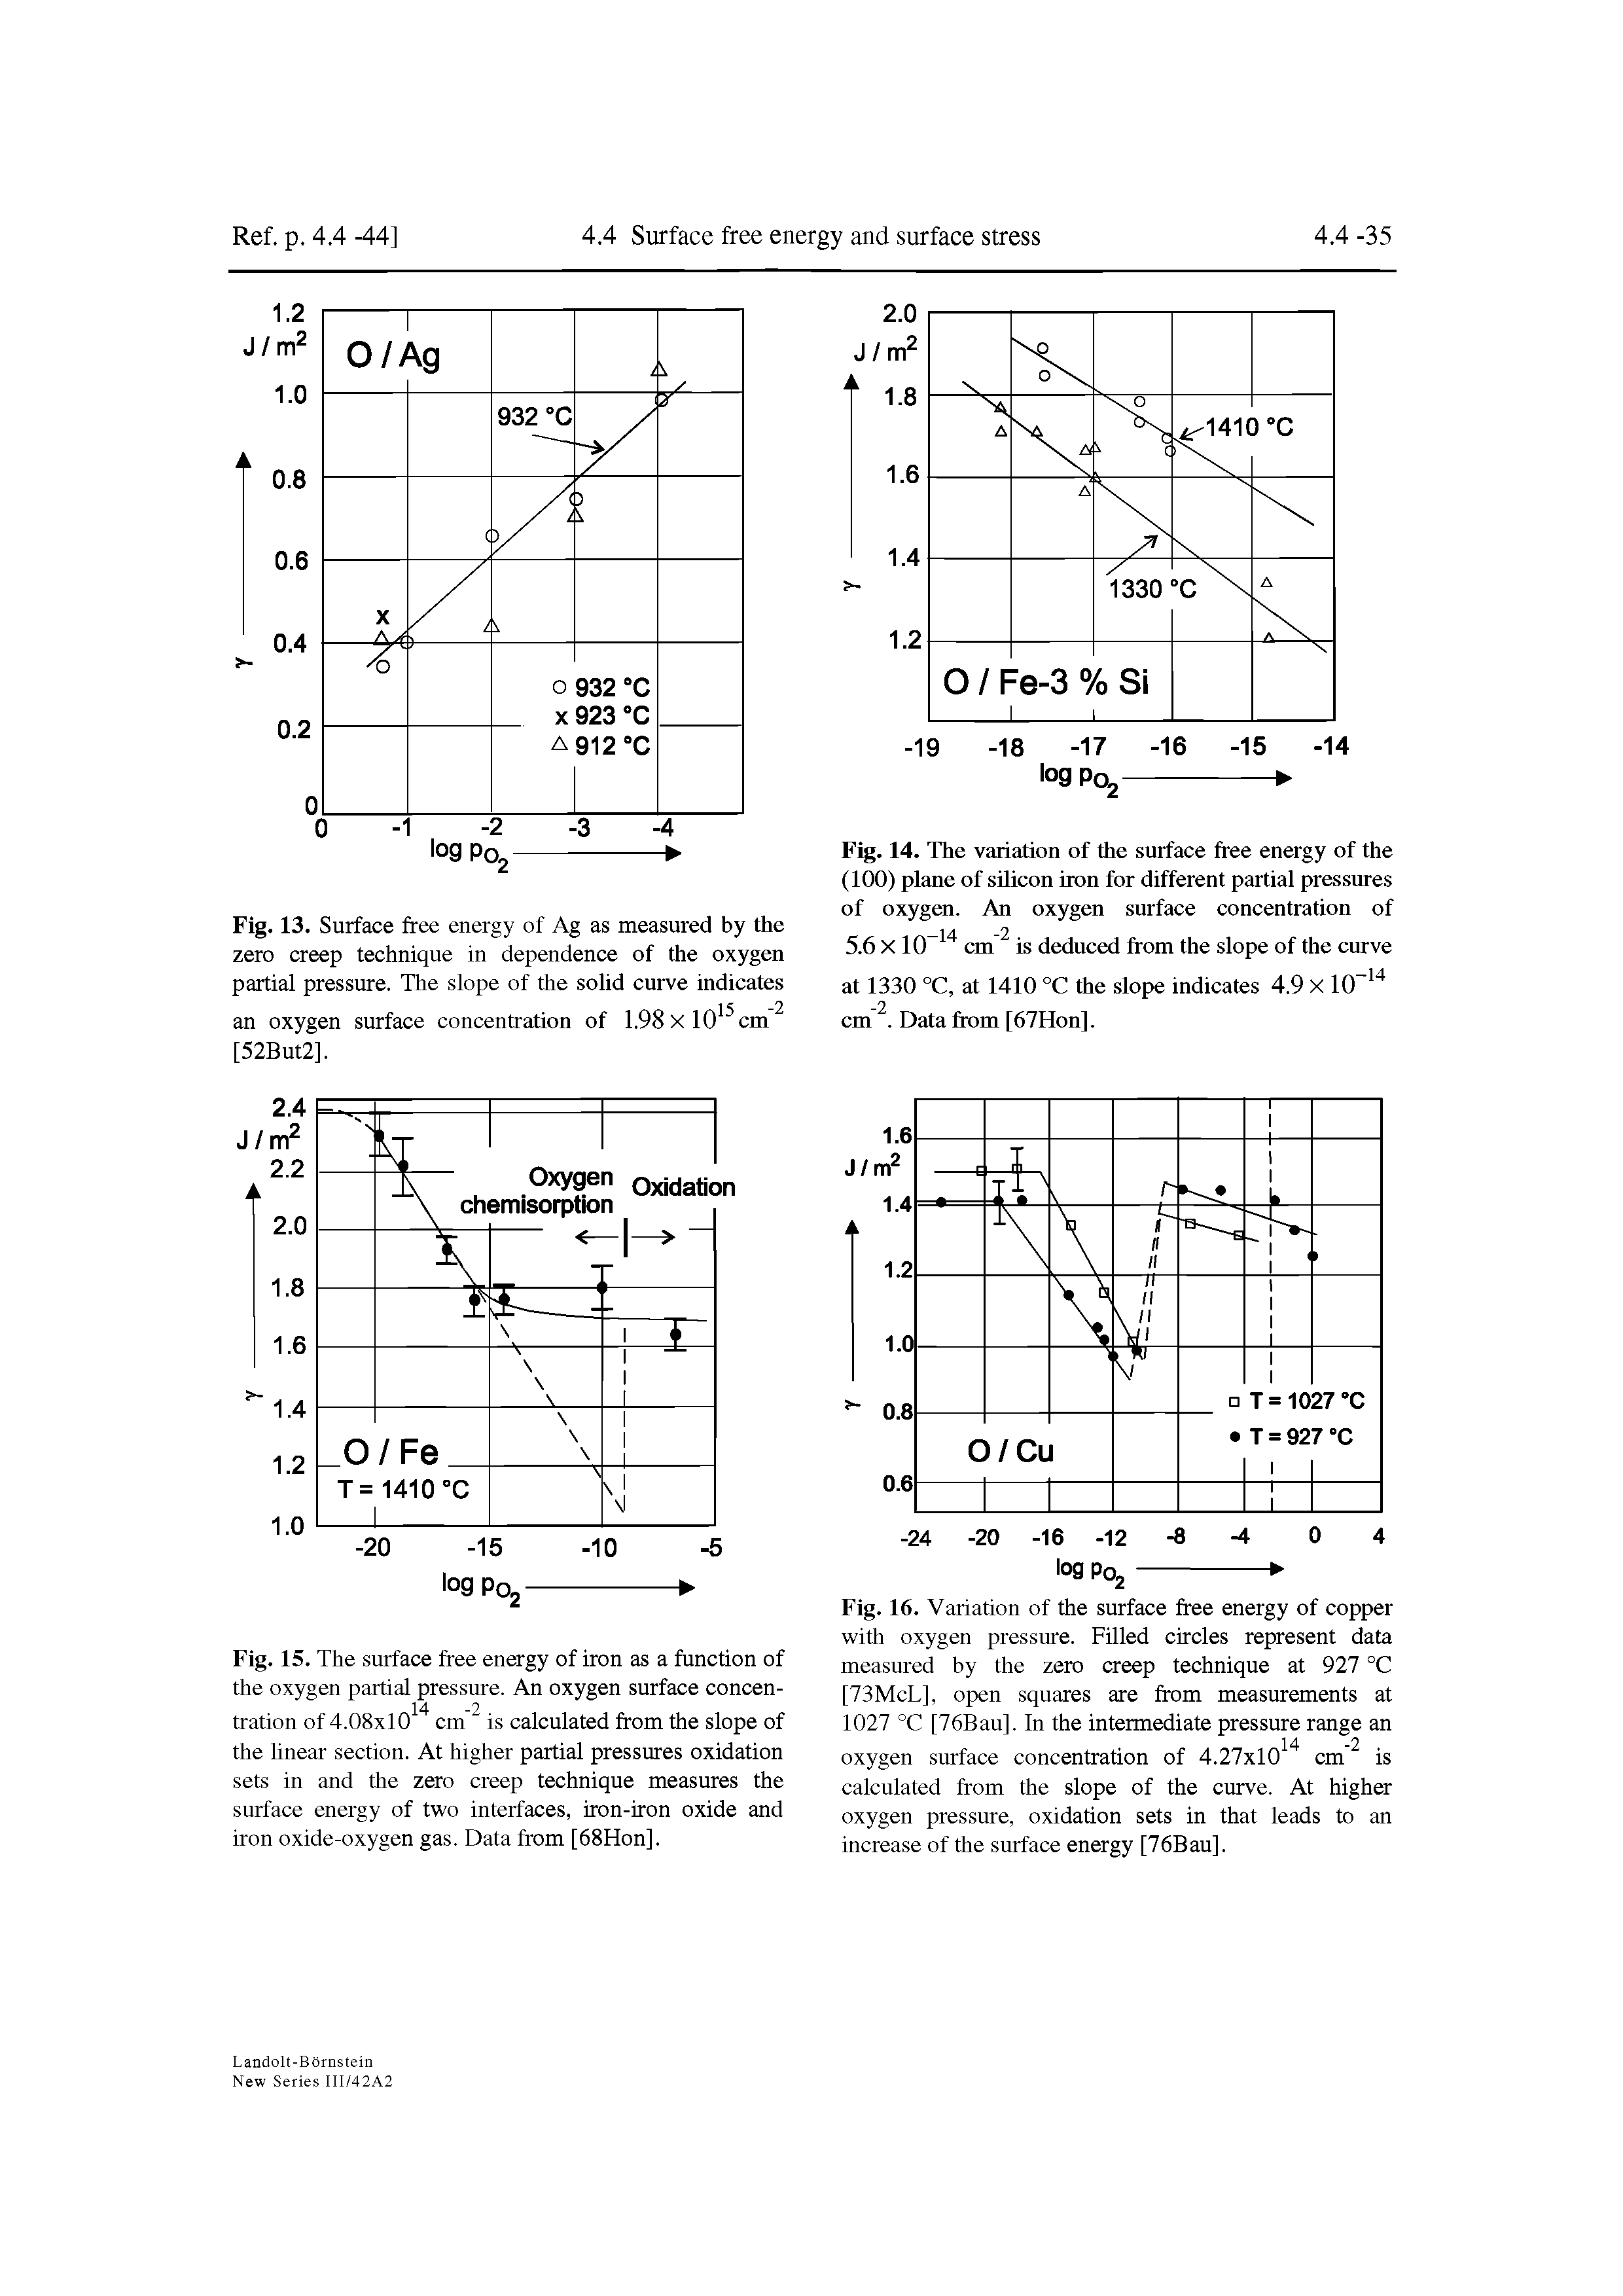 Fig. 16. Variation of the surface free energy of copper with oxygen pressure. Filled circles represent data measured by the zero creep technique at 927 °C [73McL], open squares are from measurements at...